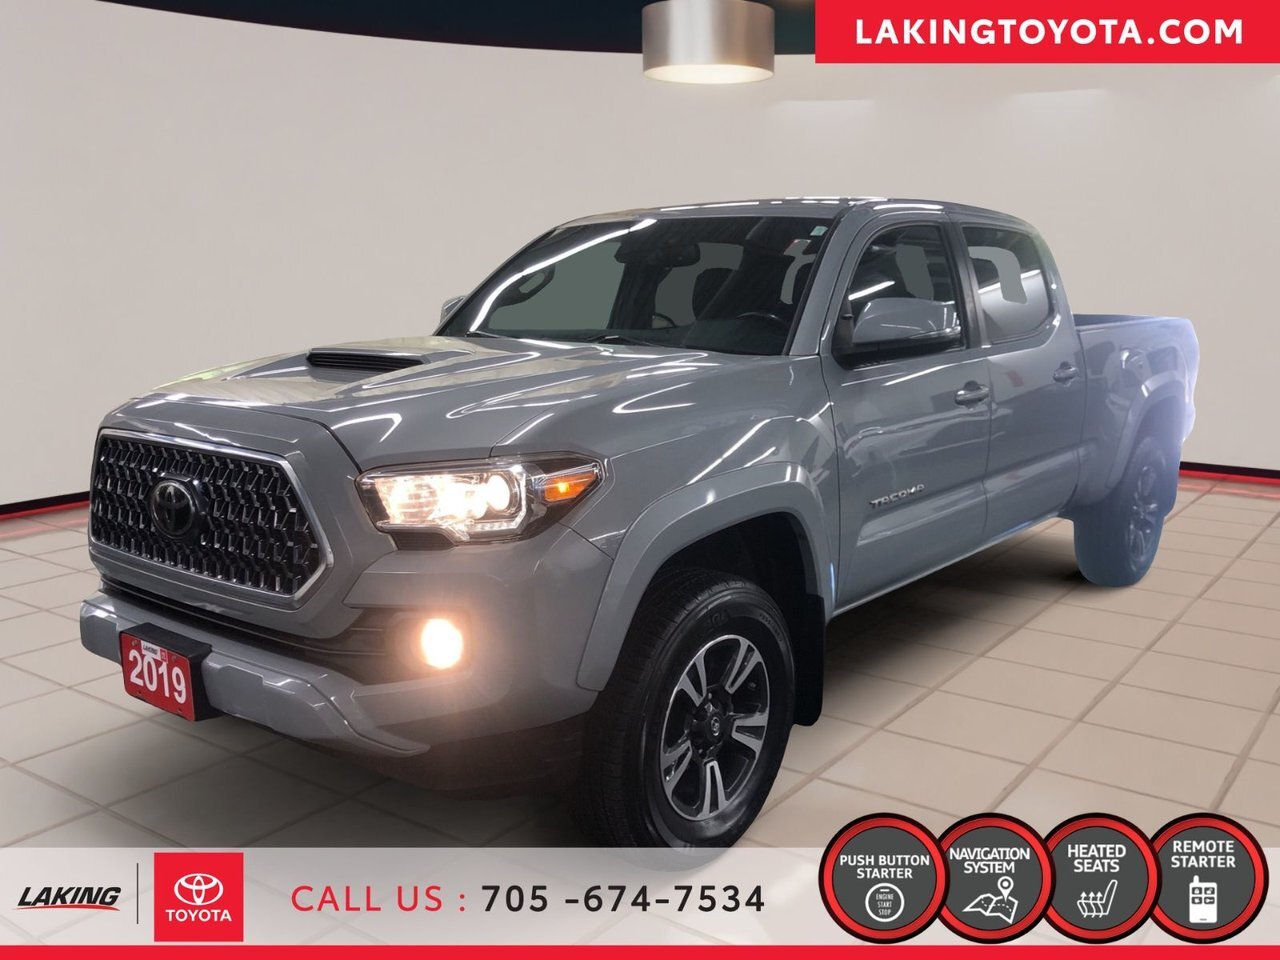 2019 Toyota Tacoma SR5 TRD 4X4 SPORT Double Cab If excellent utility 